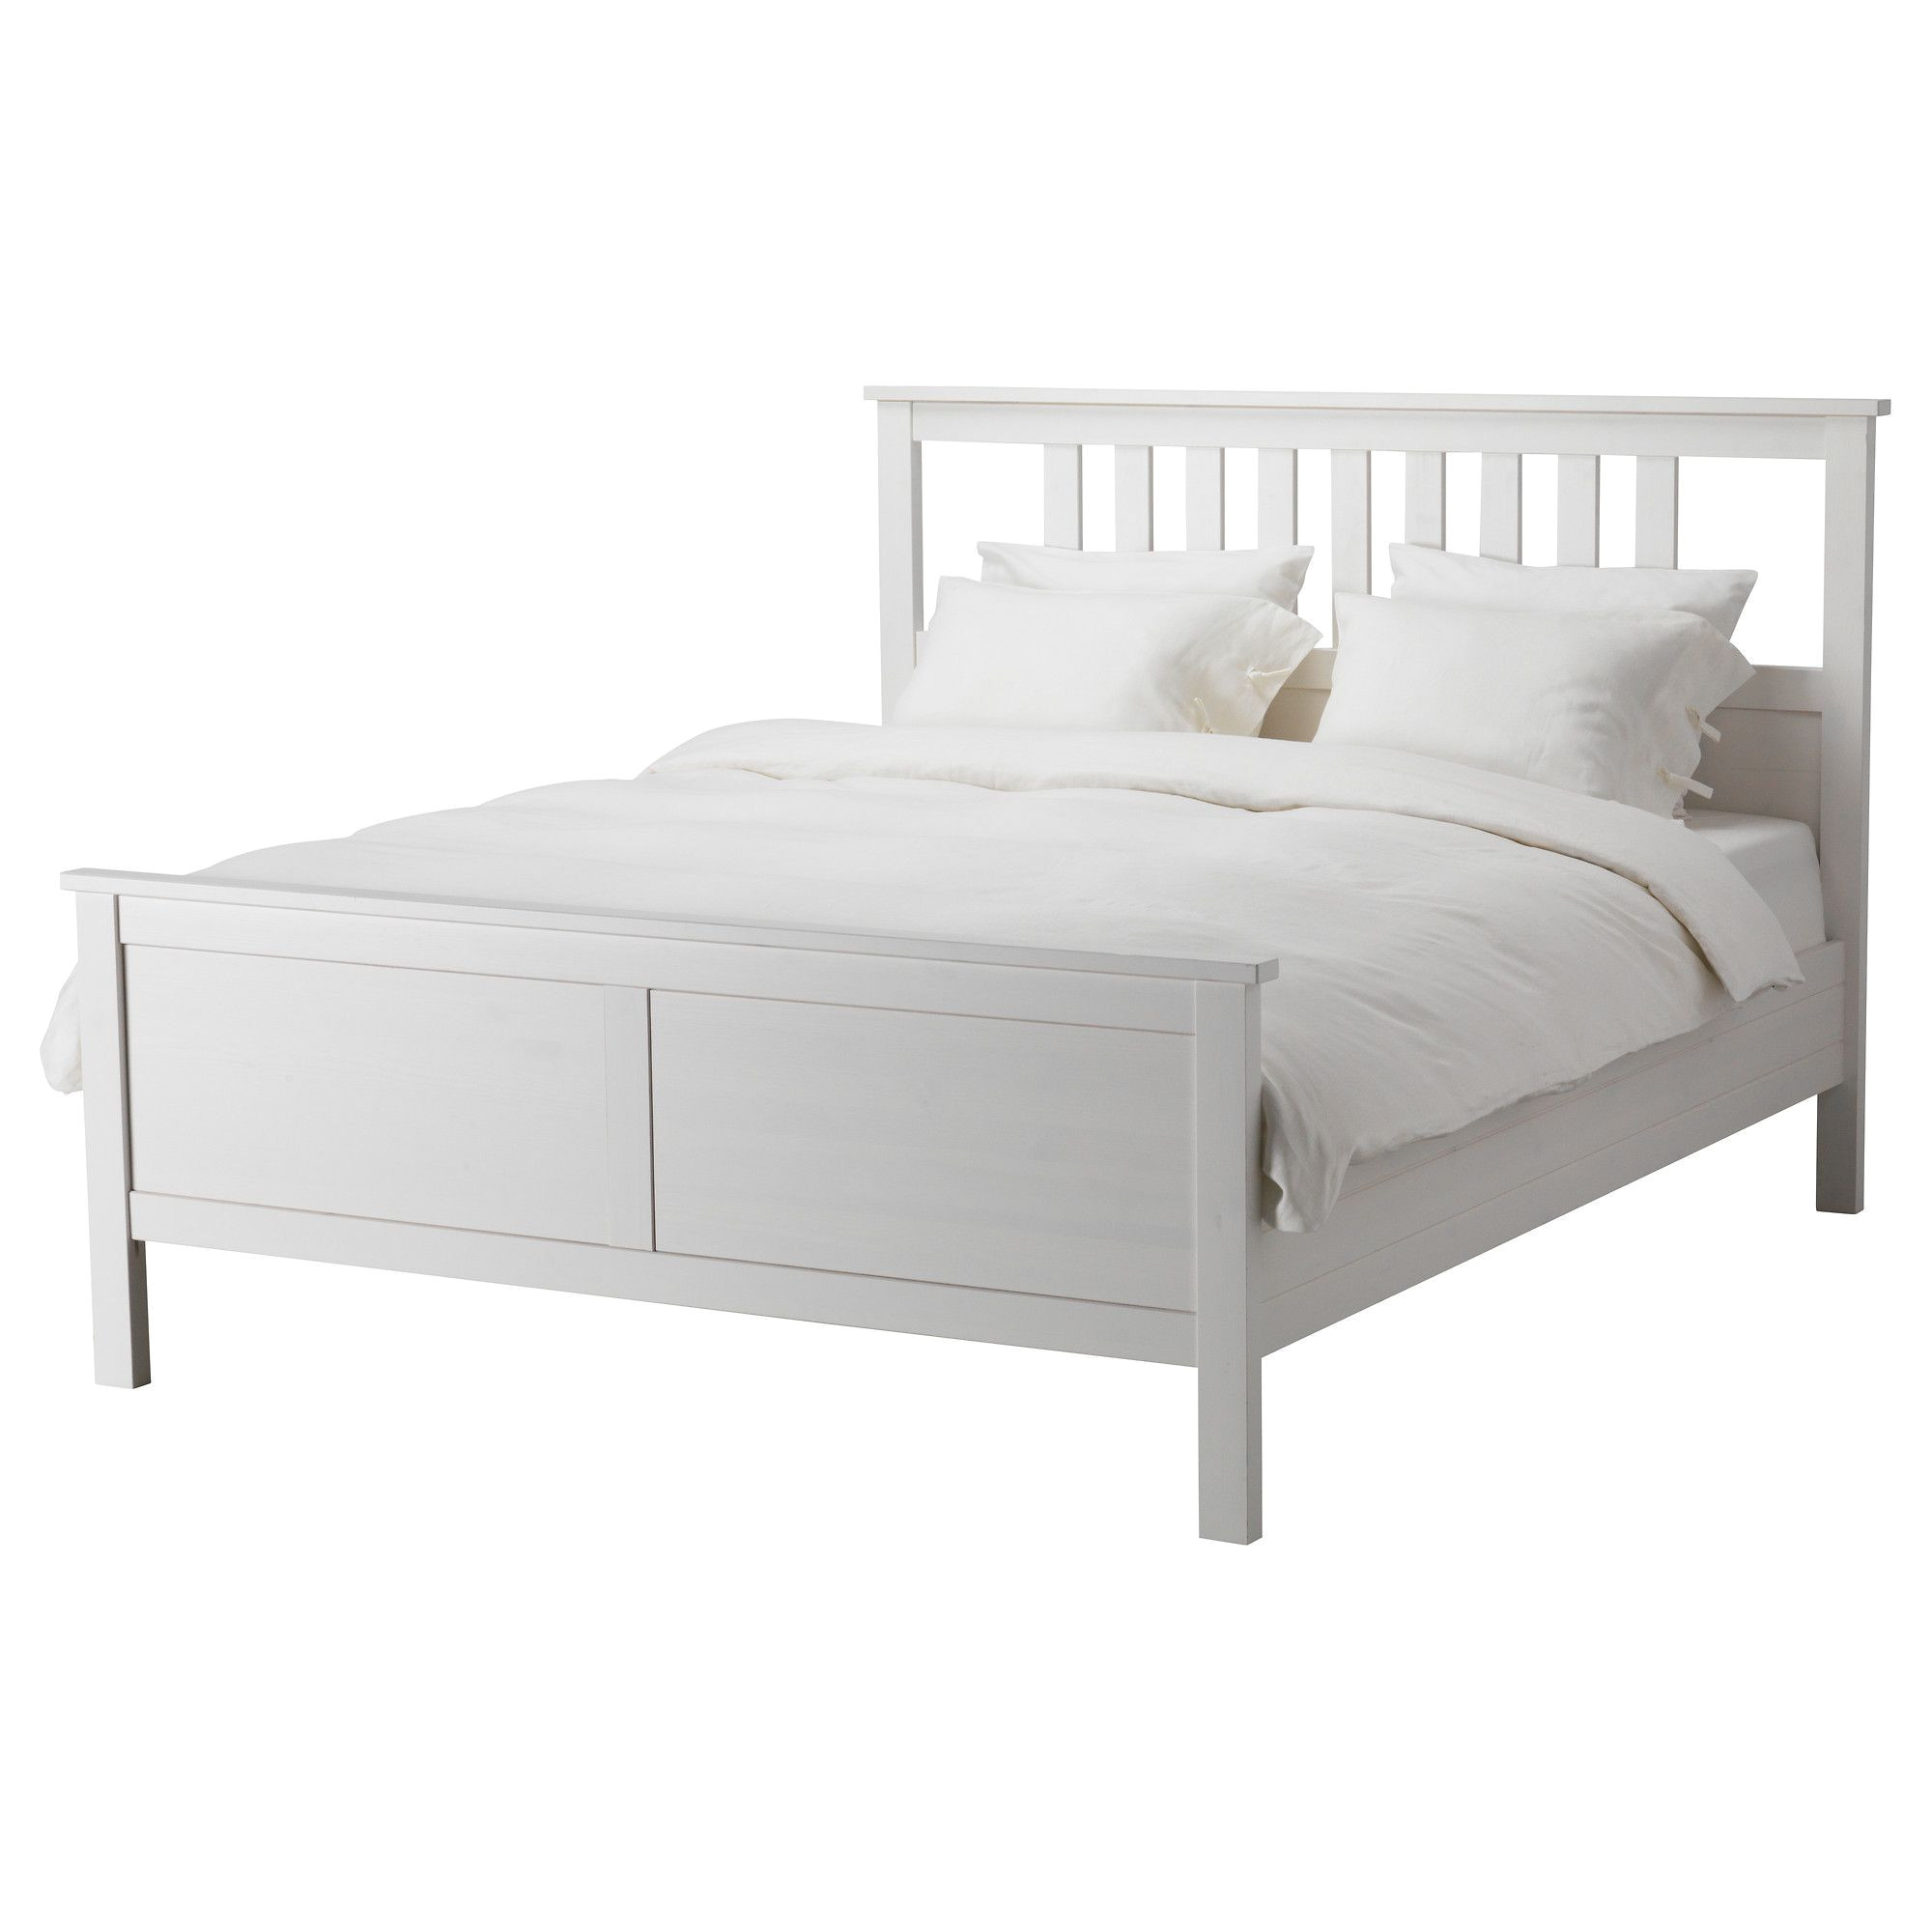 hemnes bed frame white stain double ikea ikea in 2018